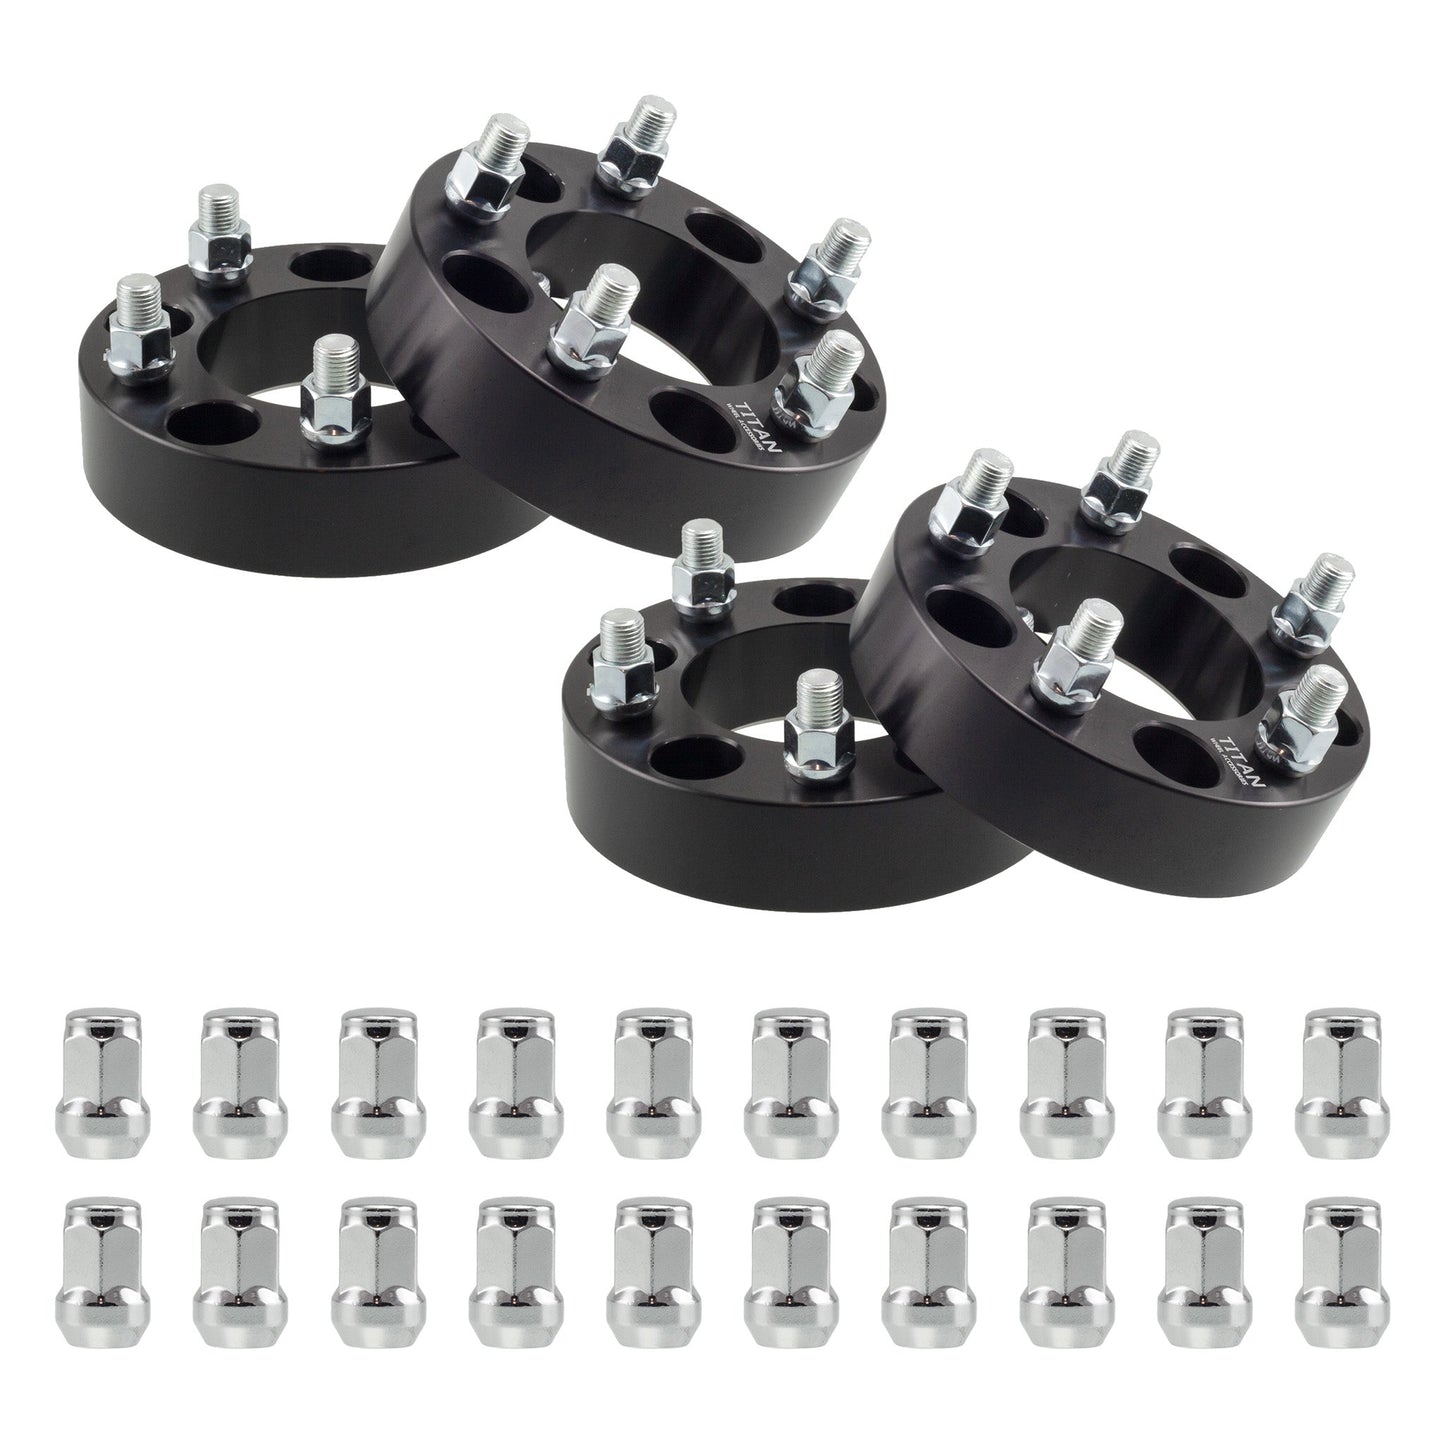 1" (25mm) Titan Wheel Spacers for 2015+ Ford Mustang | 5x4.5 | 70.5 Hubcentric |14x1.5 Studs | Titan Wheel Accessories